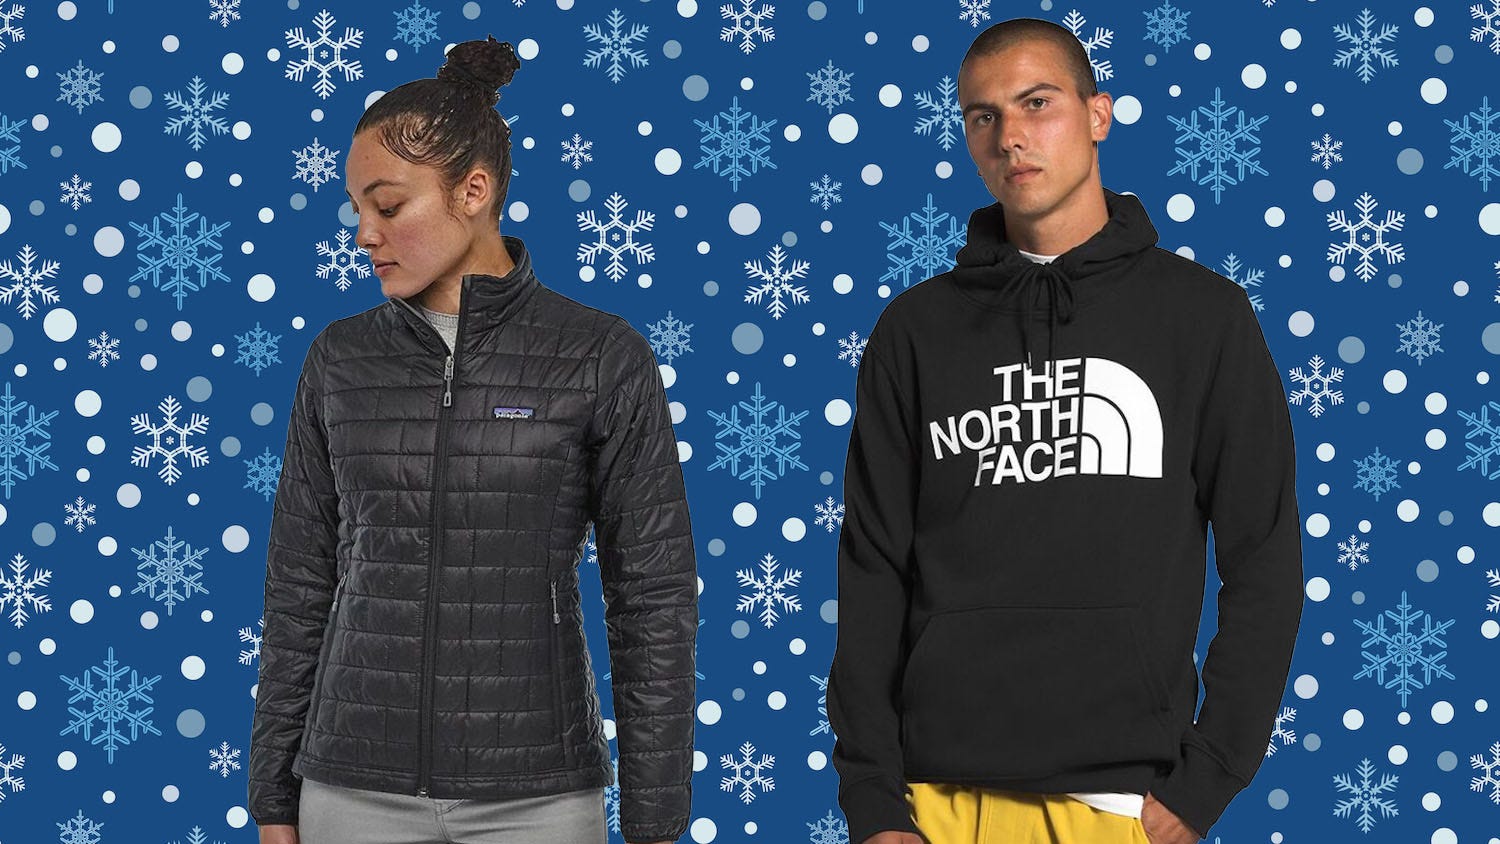 north face jacket womens sale